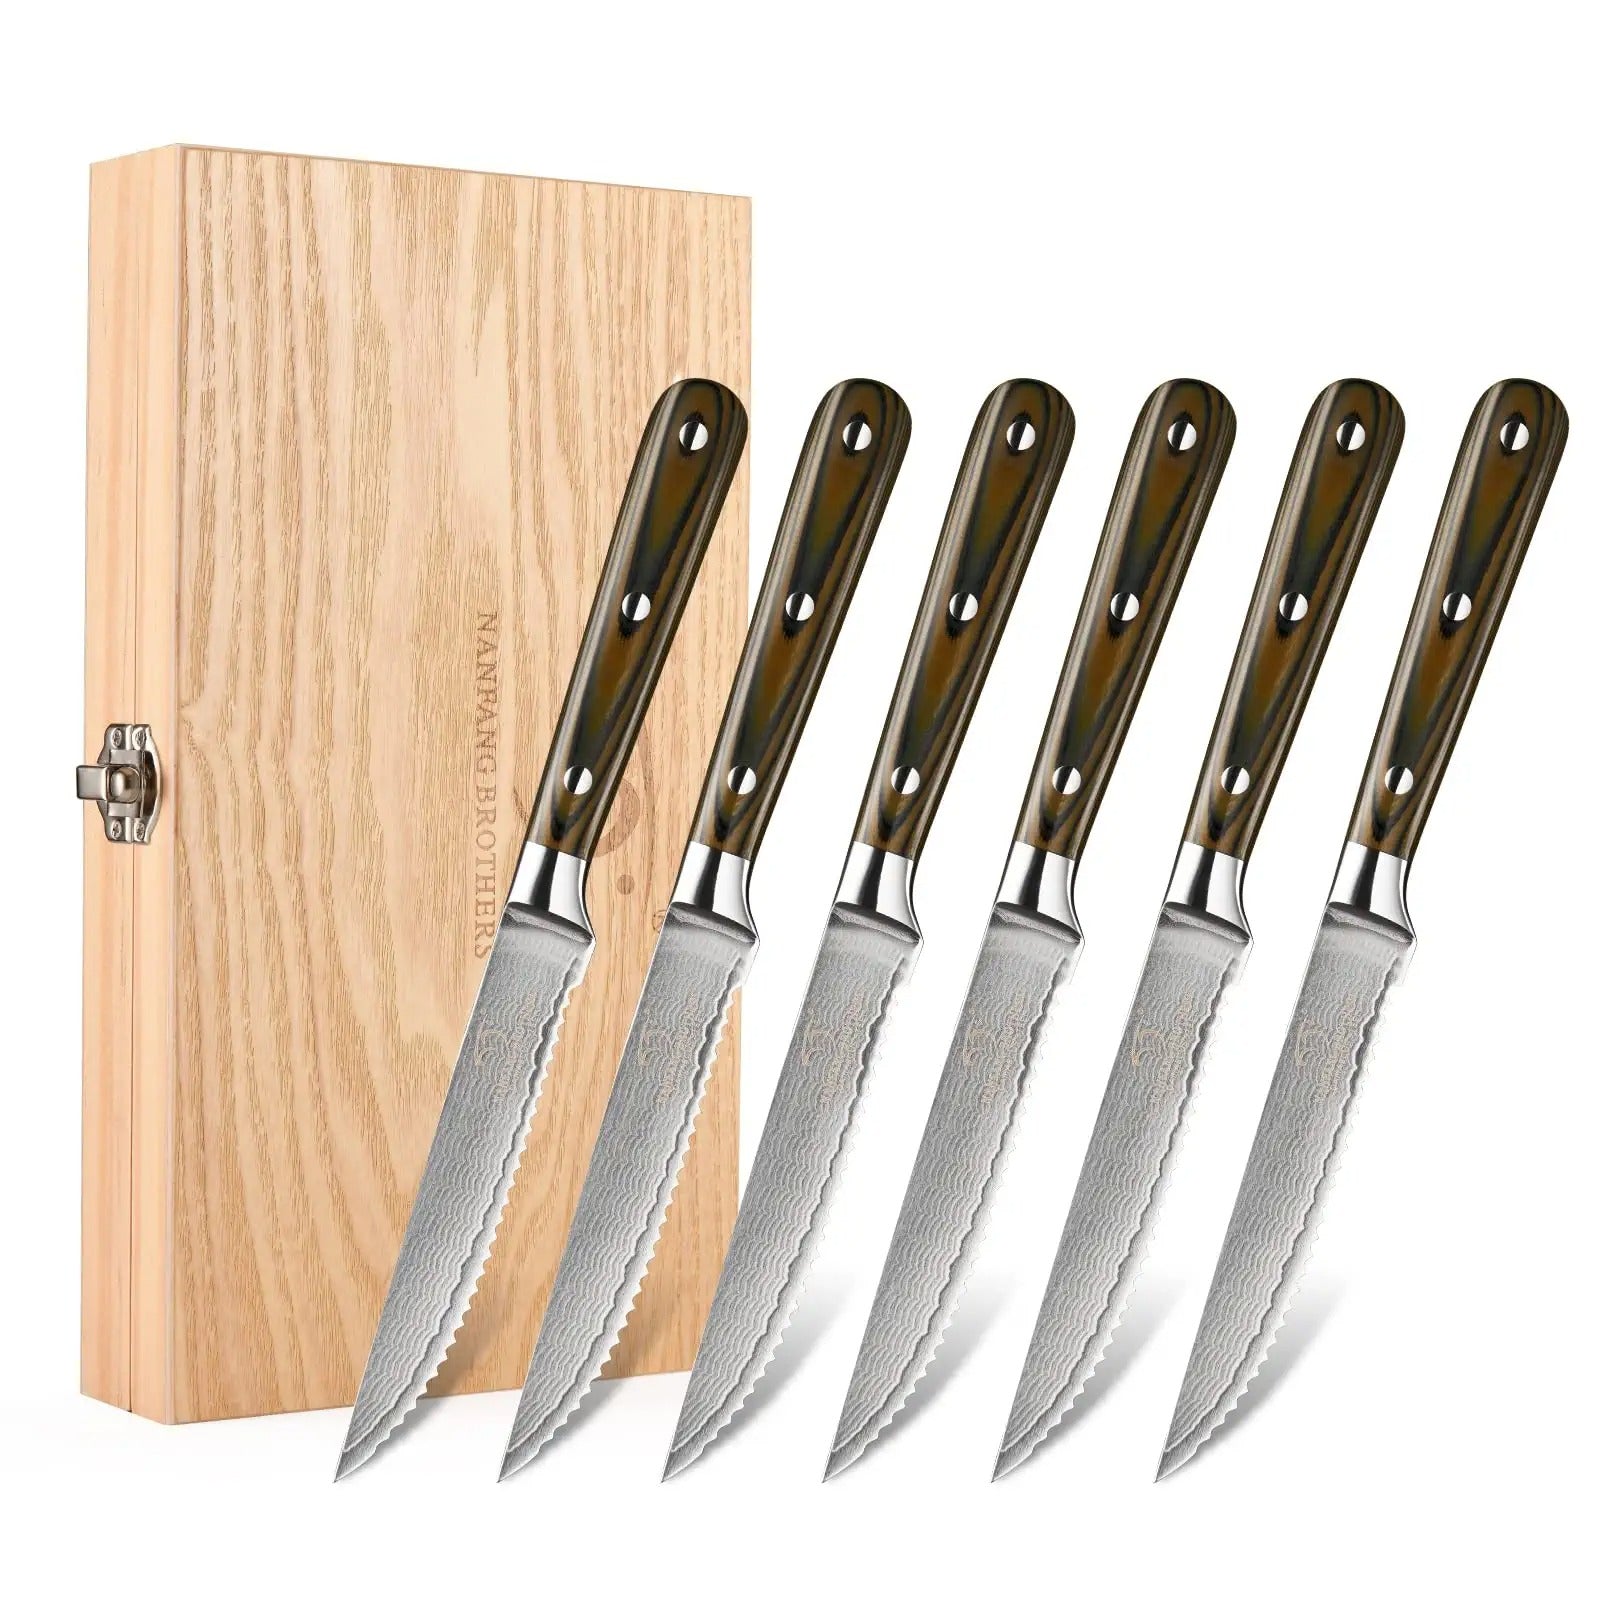  Damascus Kitchen Knife Set, 15-Piece Kitchen Knife Set with  Block, ABS Ergonomic Handle for Chef Knife Set and Serrated Steak Knives  Knife Sharpener and Kitchen Shears, Beechwood Block: Home & Kitchen